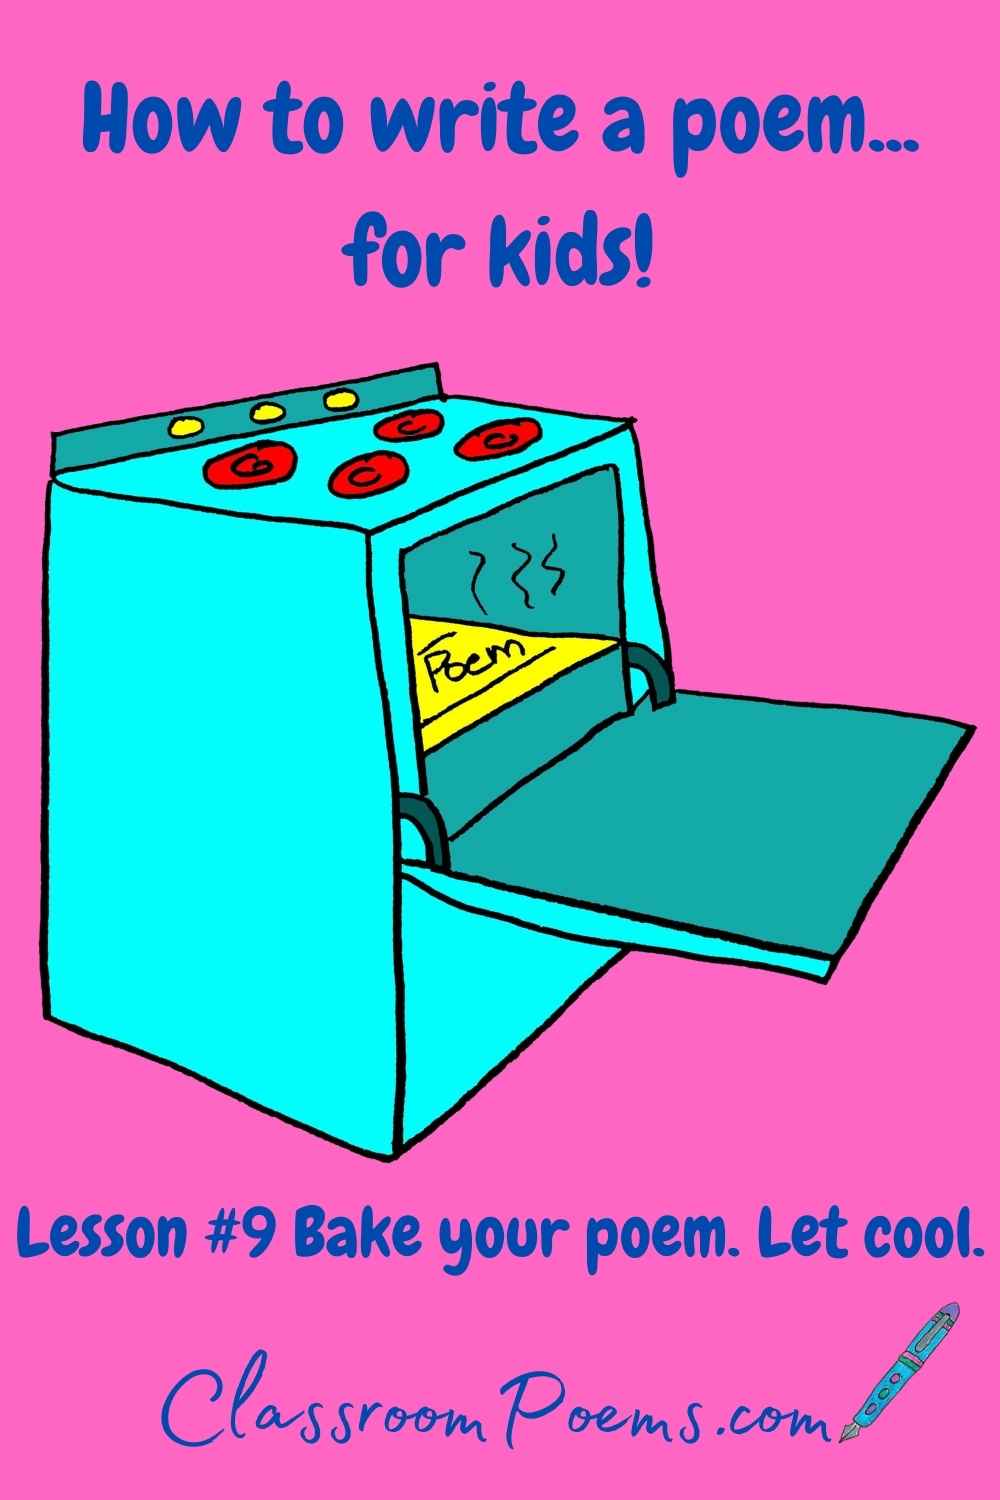 How to teach poetry to kids. Bake your poem and let it cool.